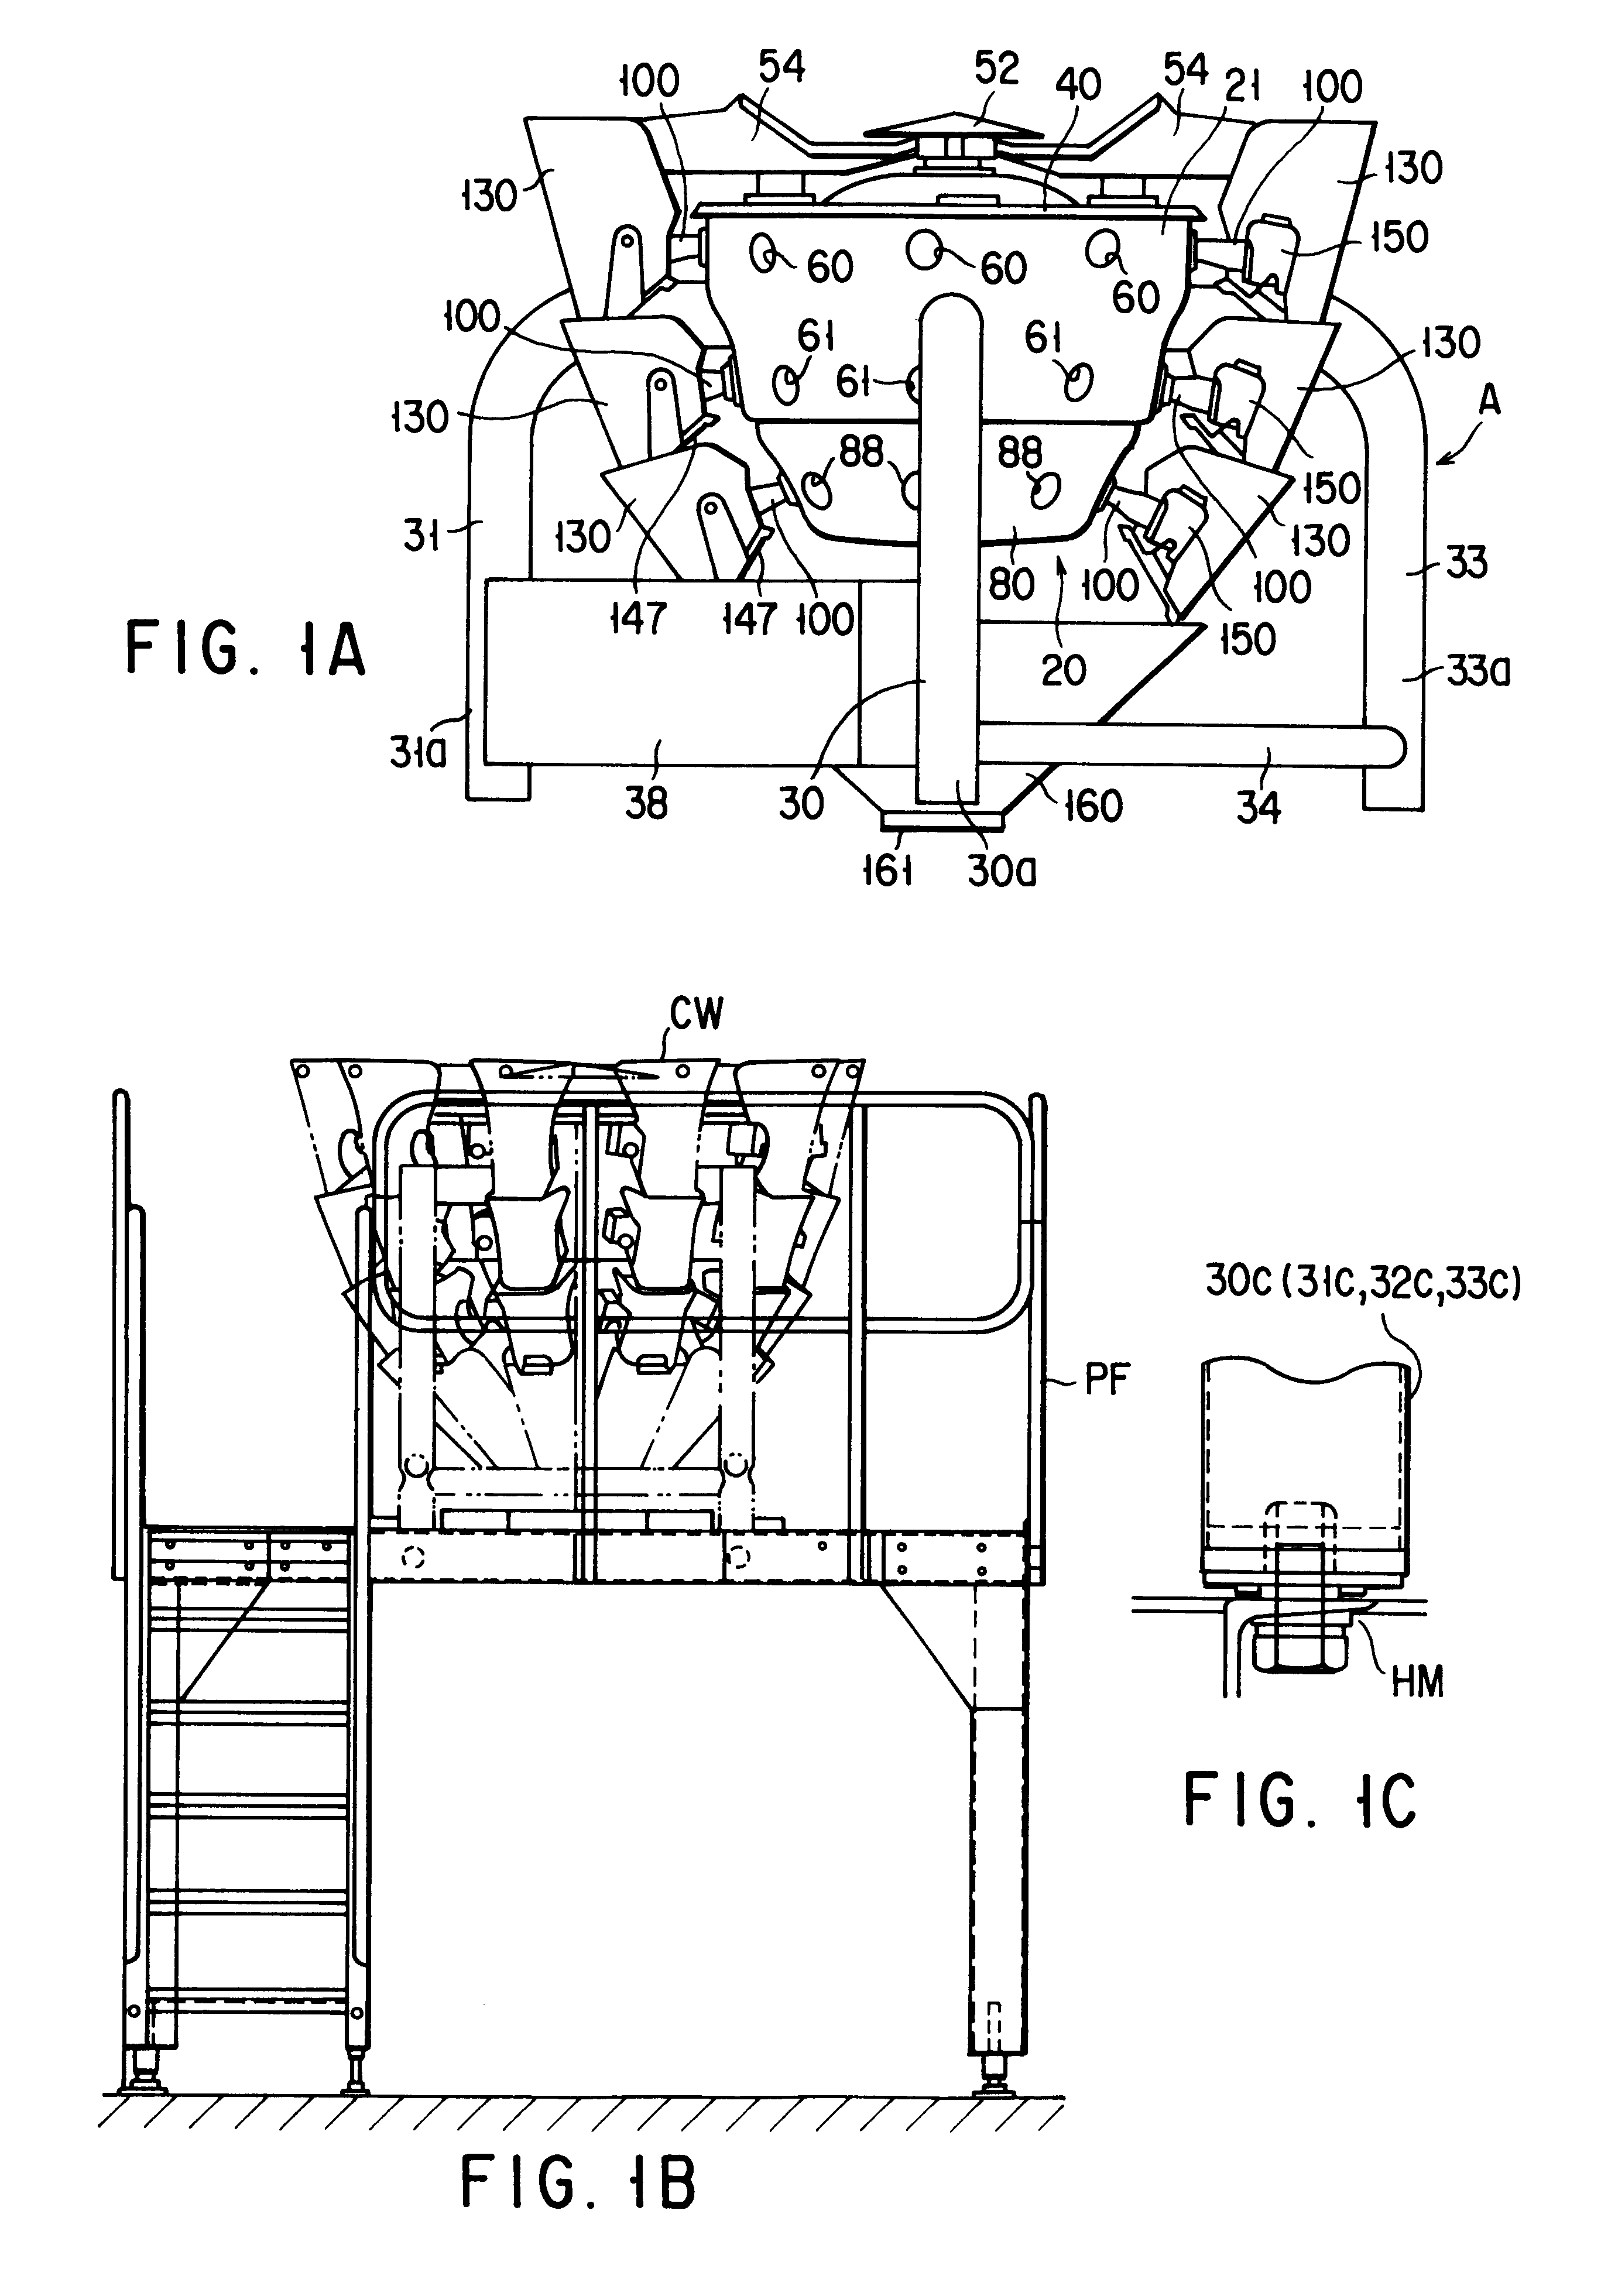 Combination weighing apparatus having a weighing device base, to which a plurality of weighing devices are fixed, that is directly fixed to a stand